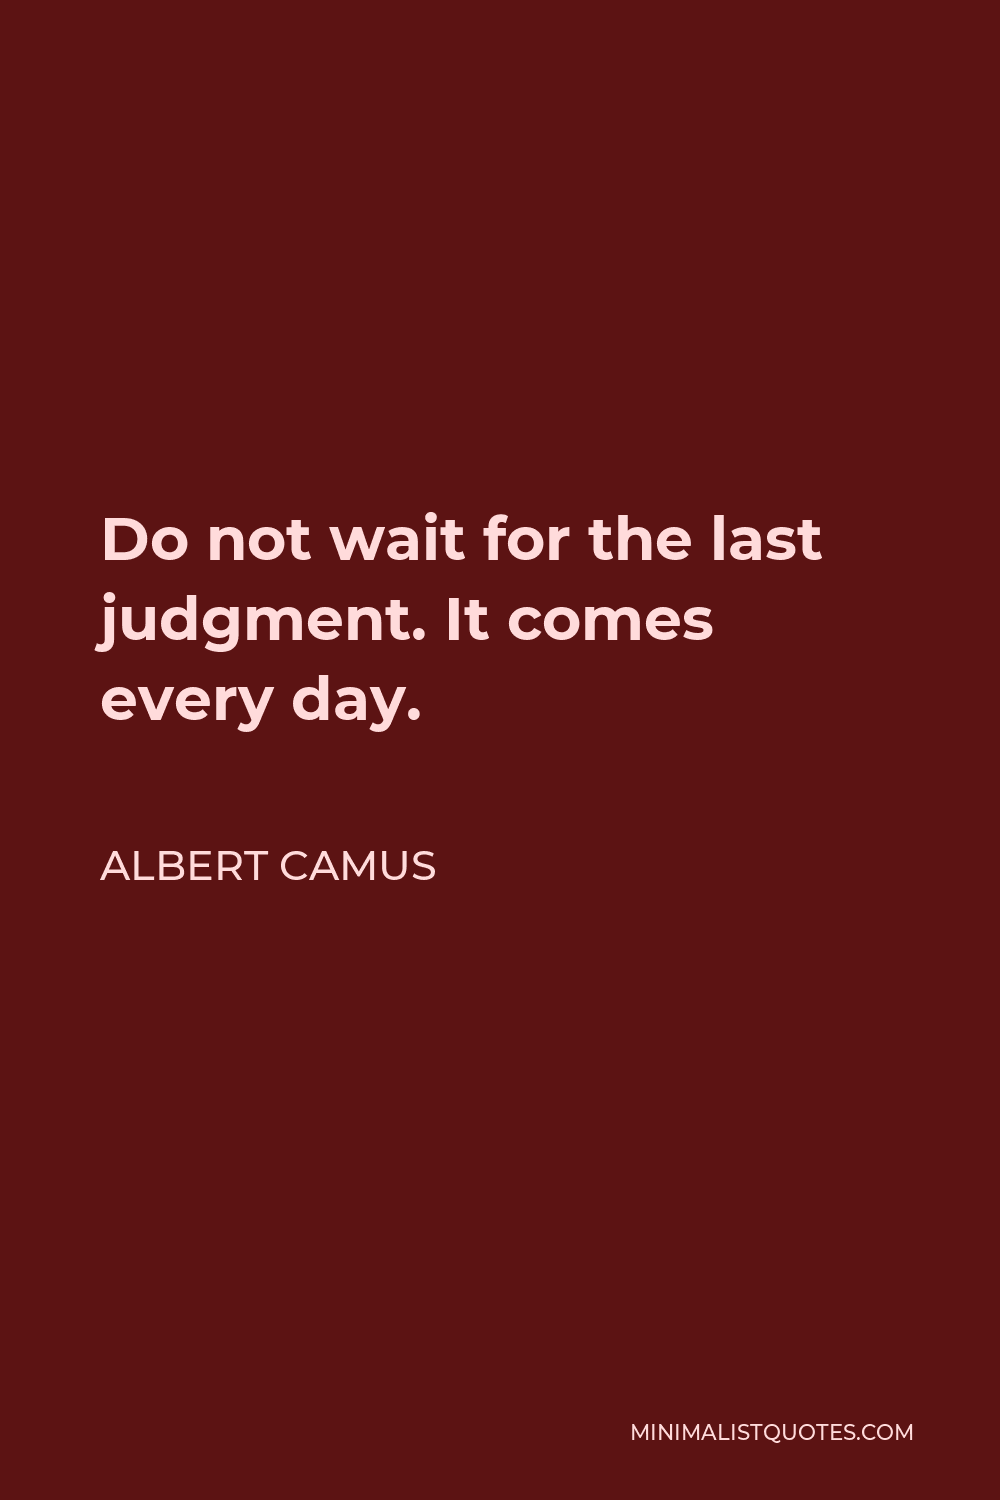 Albert Camus Quote - Do not wait for the last judgment. It comes every day.